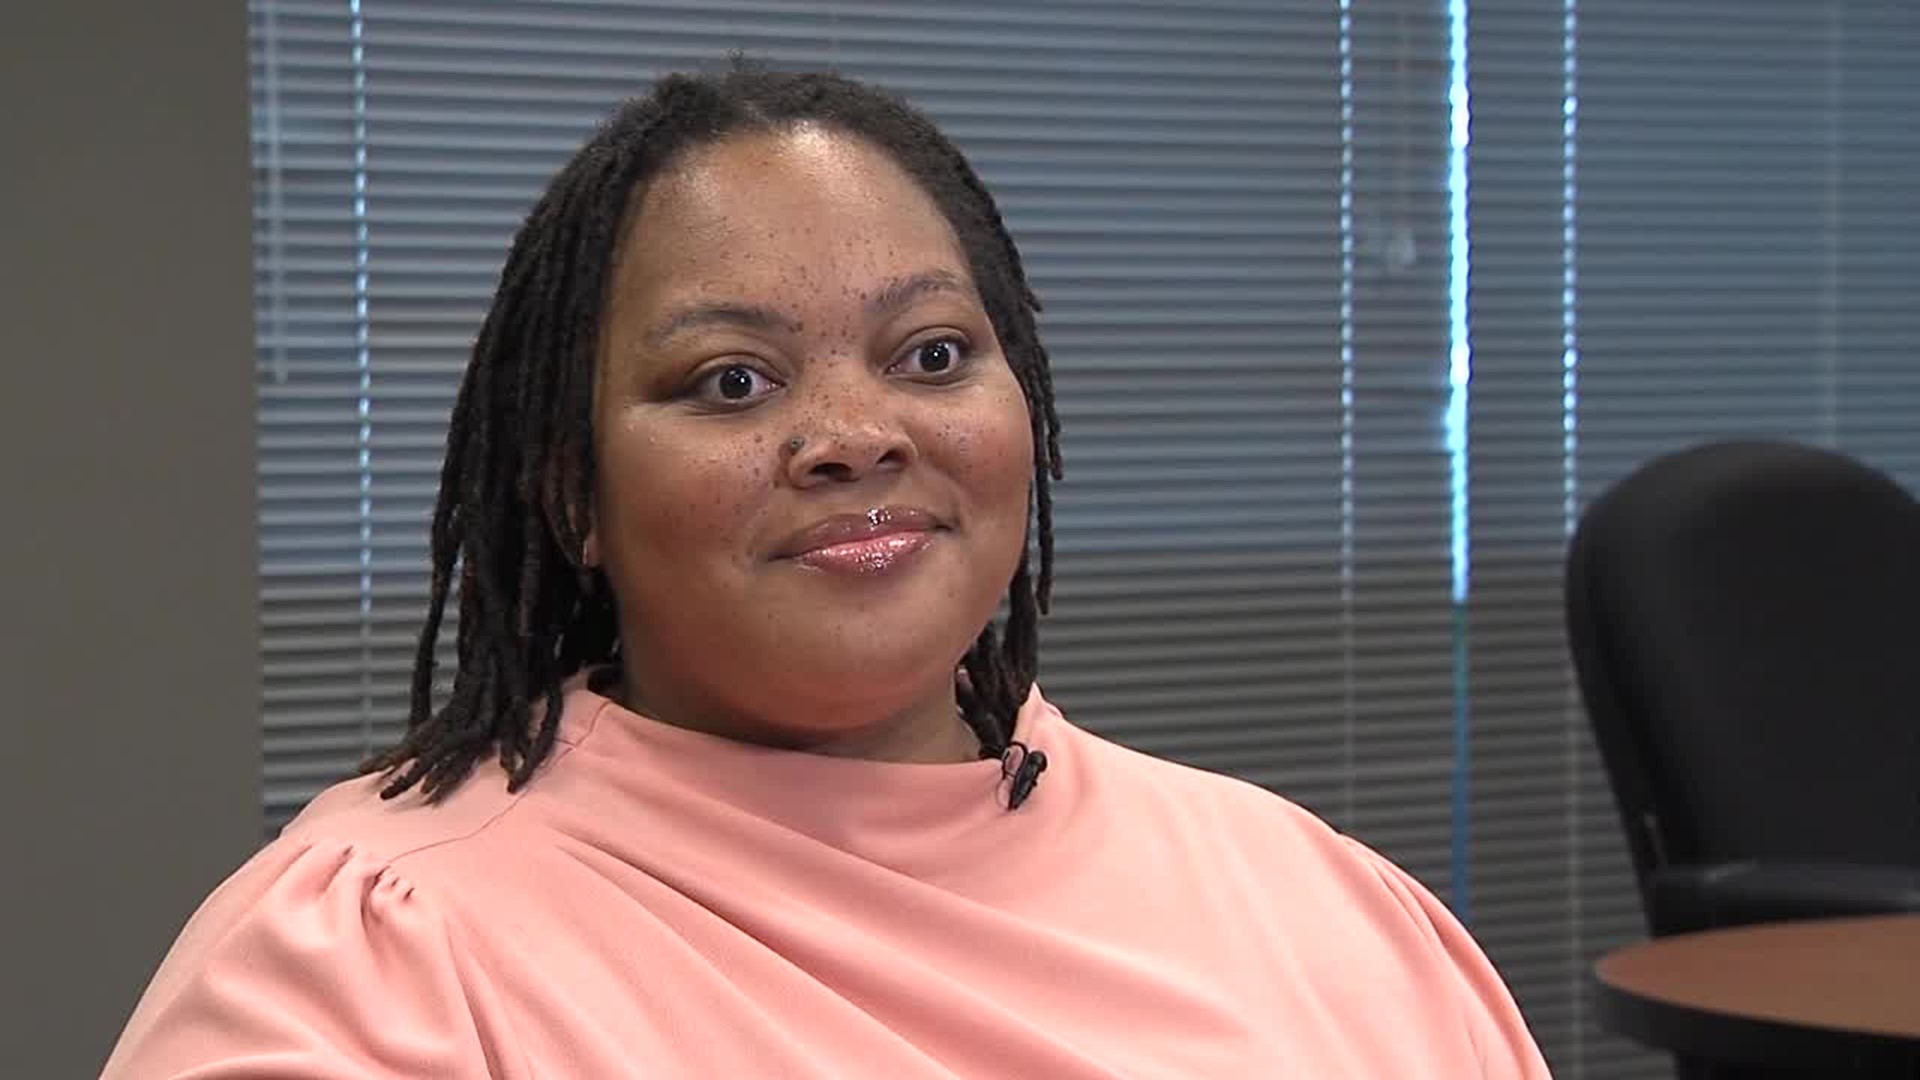 WEB EXTRA: Full interview with Shelby County Commissioner Tami Sawyer on Memphis mayoral race